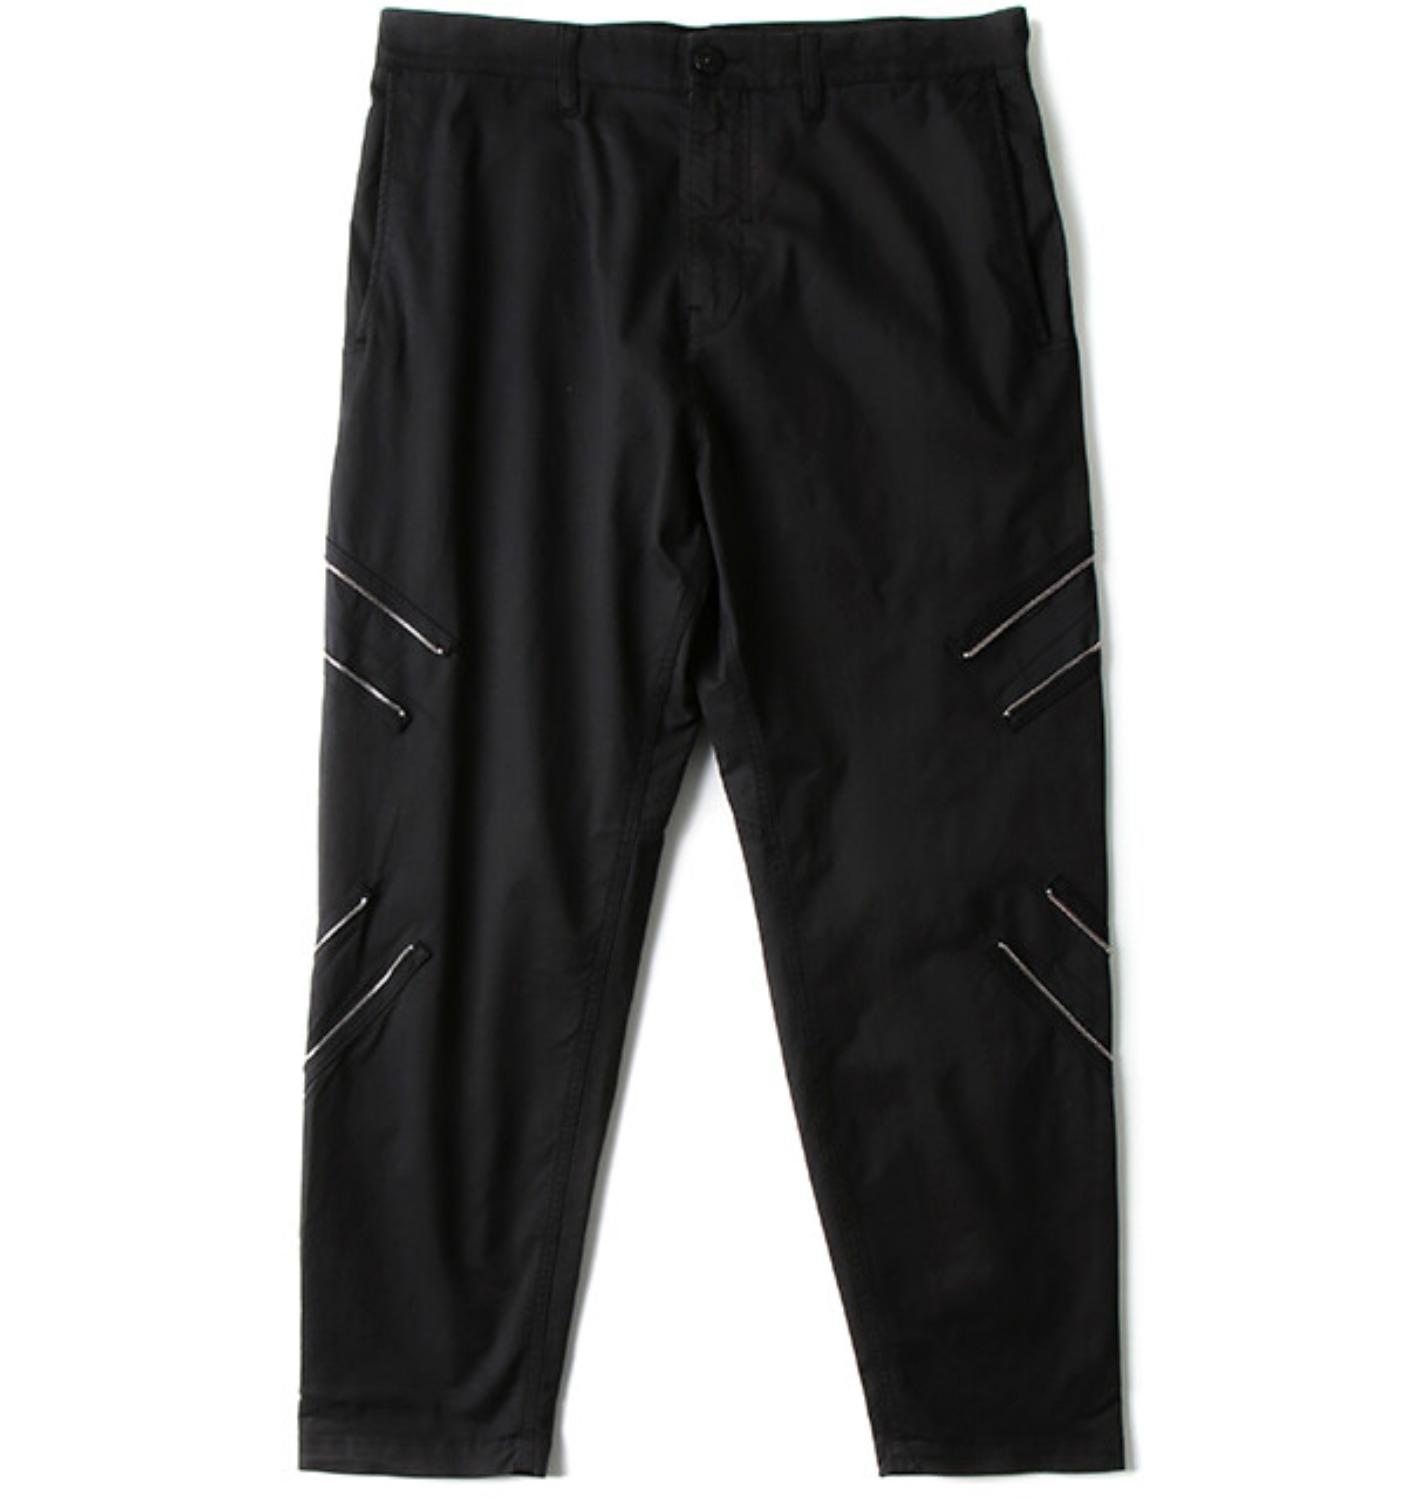 RESHAPE PANTS WITH ZIPPERS BLACK (85P2Z18)